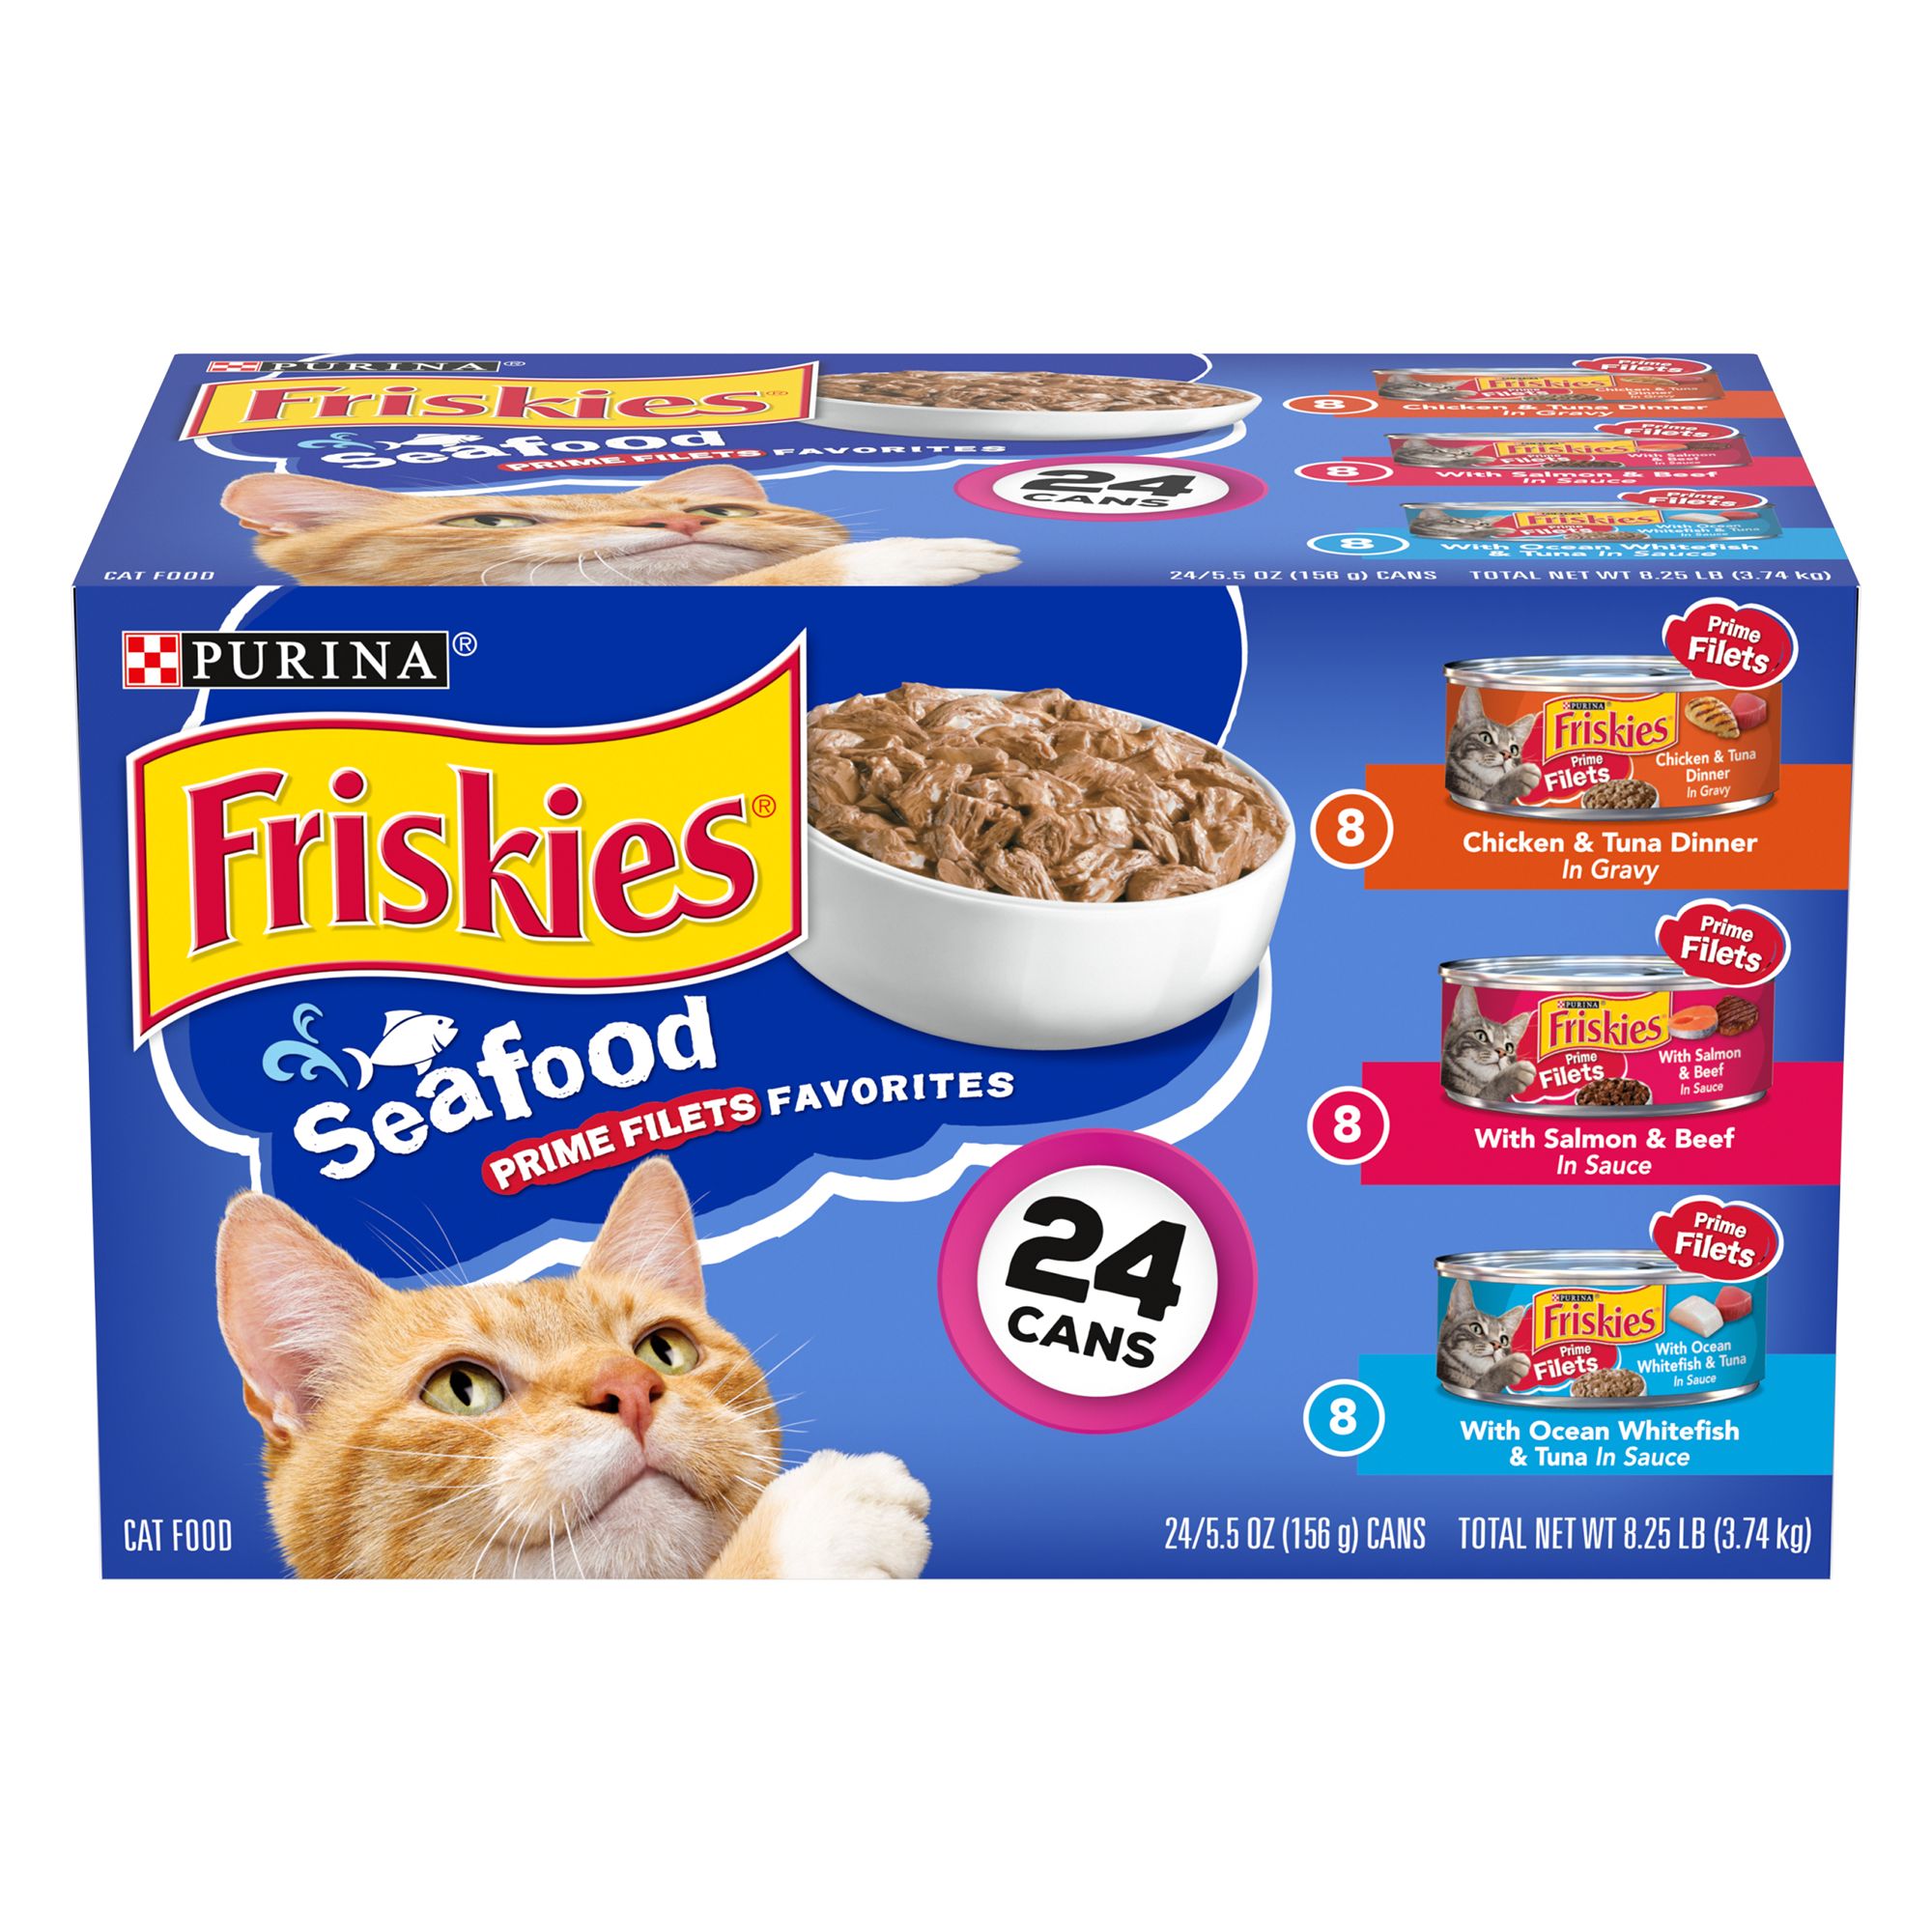 purina-friskies-adult-cat-wet-food-9-4-lb-high-protein-real-meat